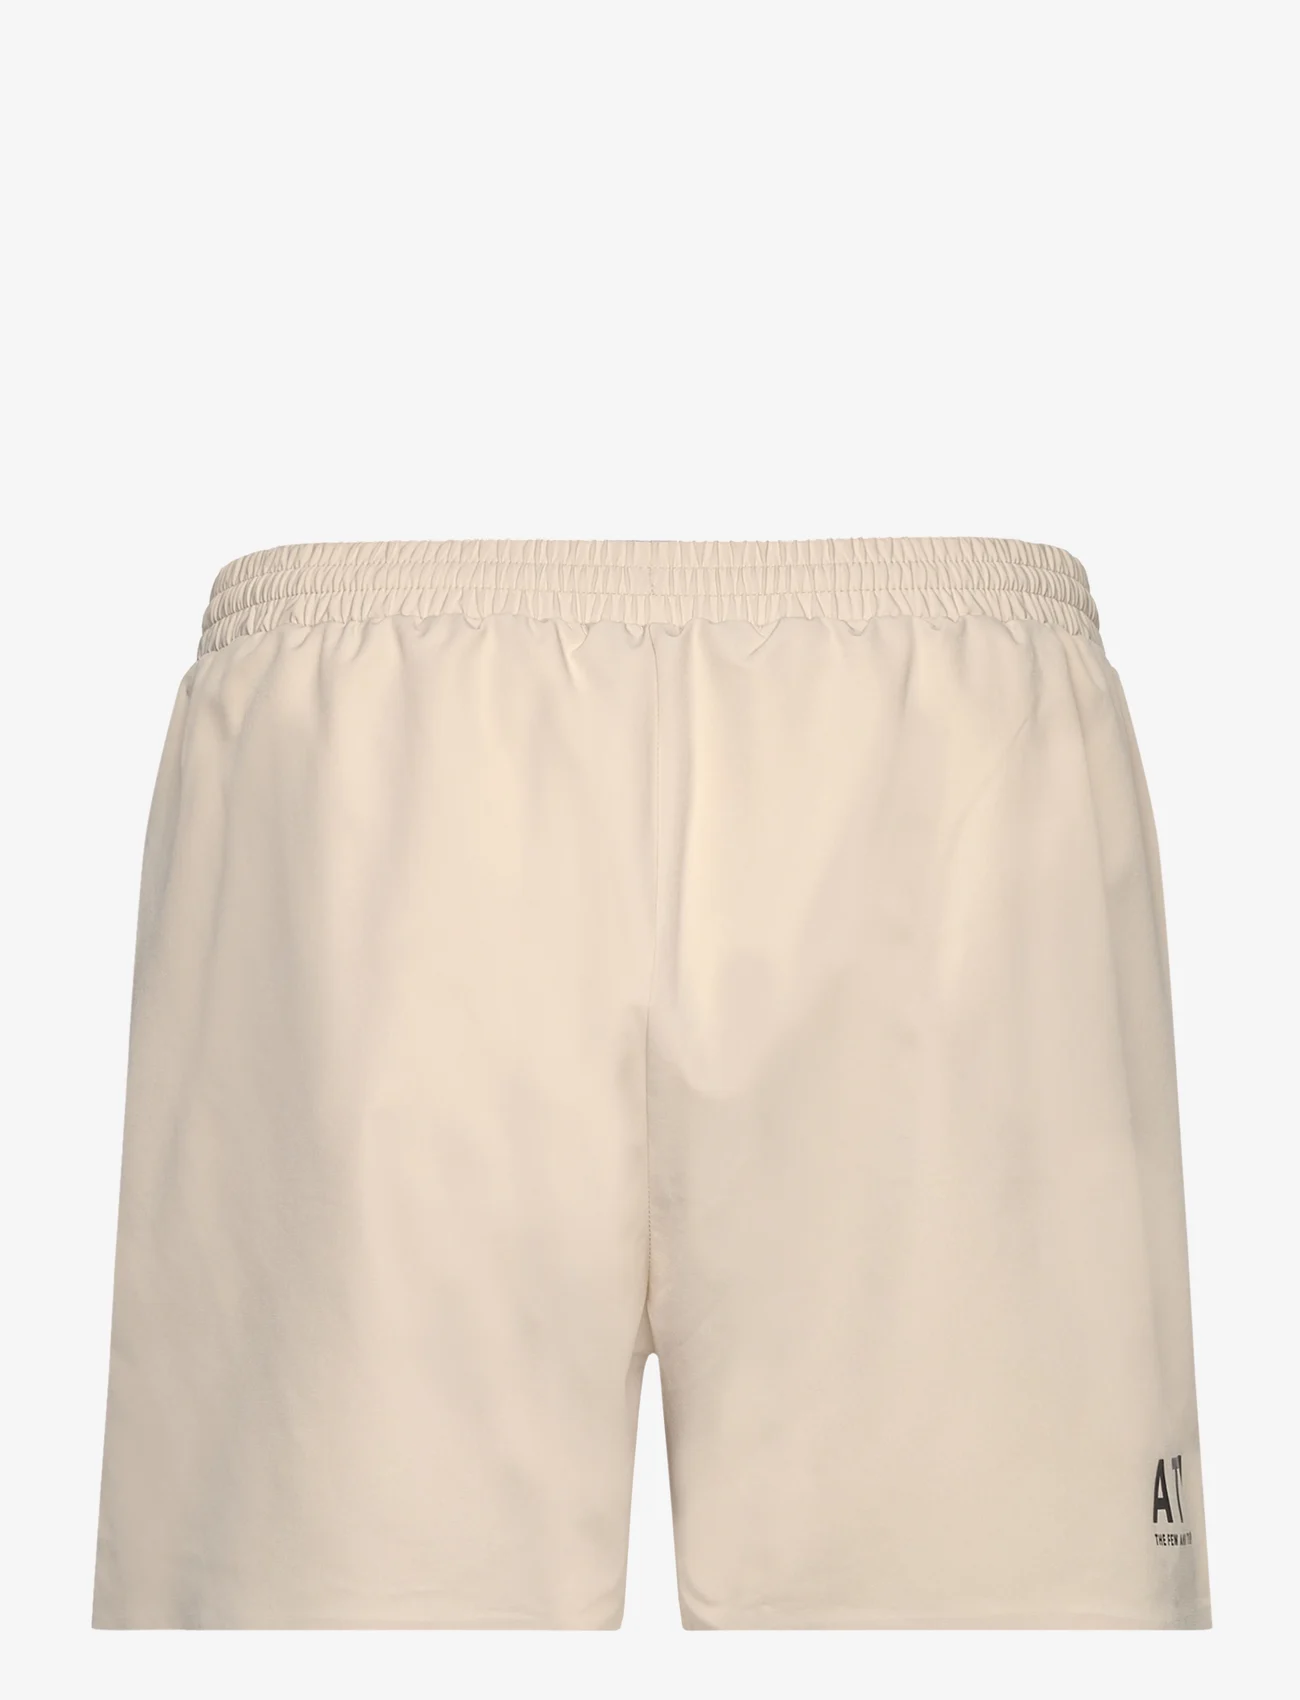 HALO - HALO 2-IN-1 TRAINING SHORTS - oyster gray - 1